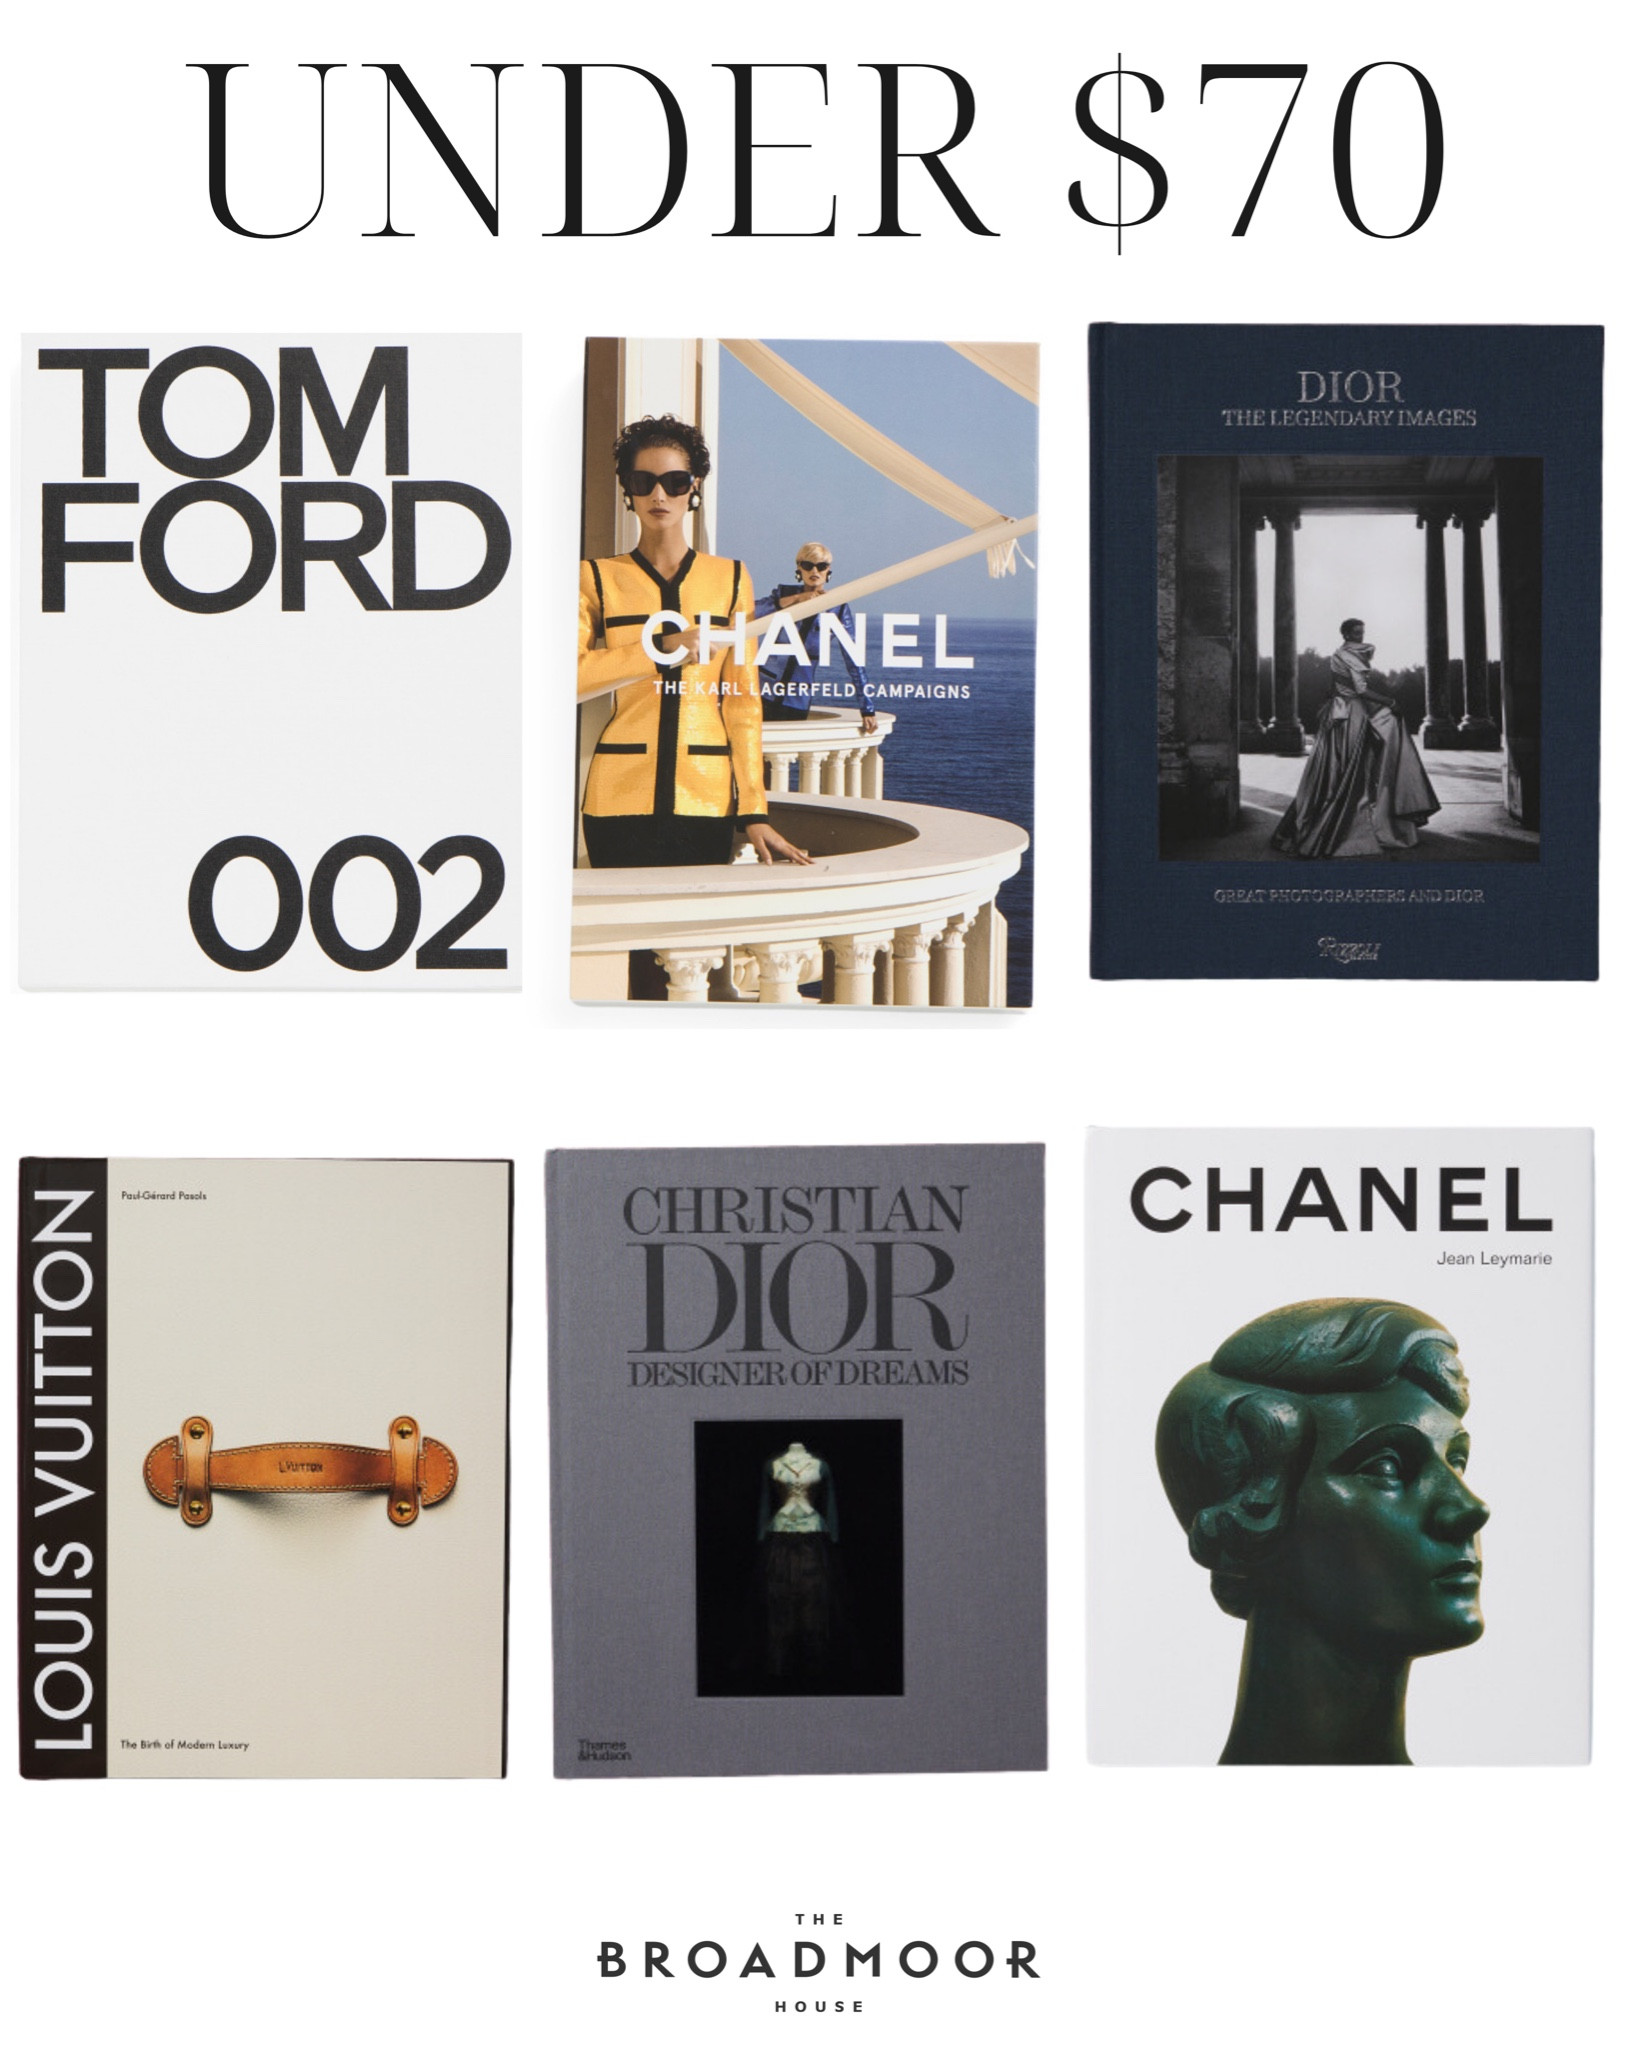 tom ford and chanel books for home decor